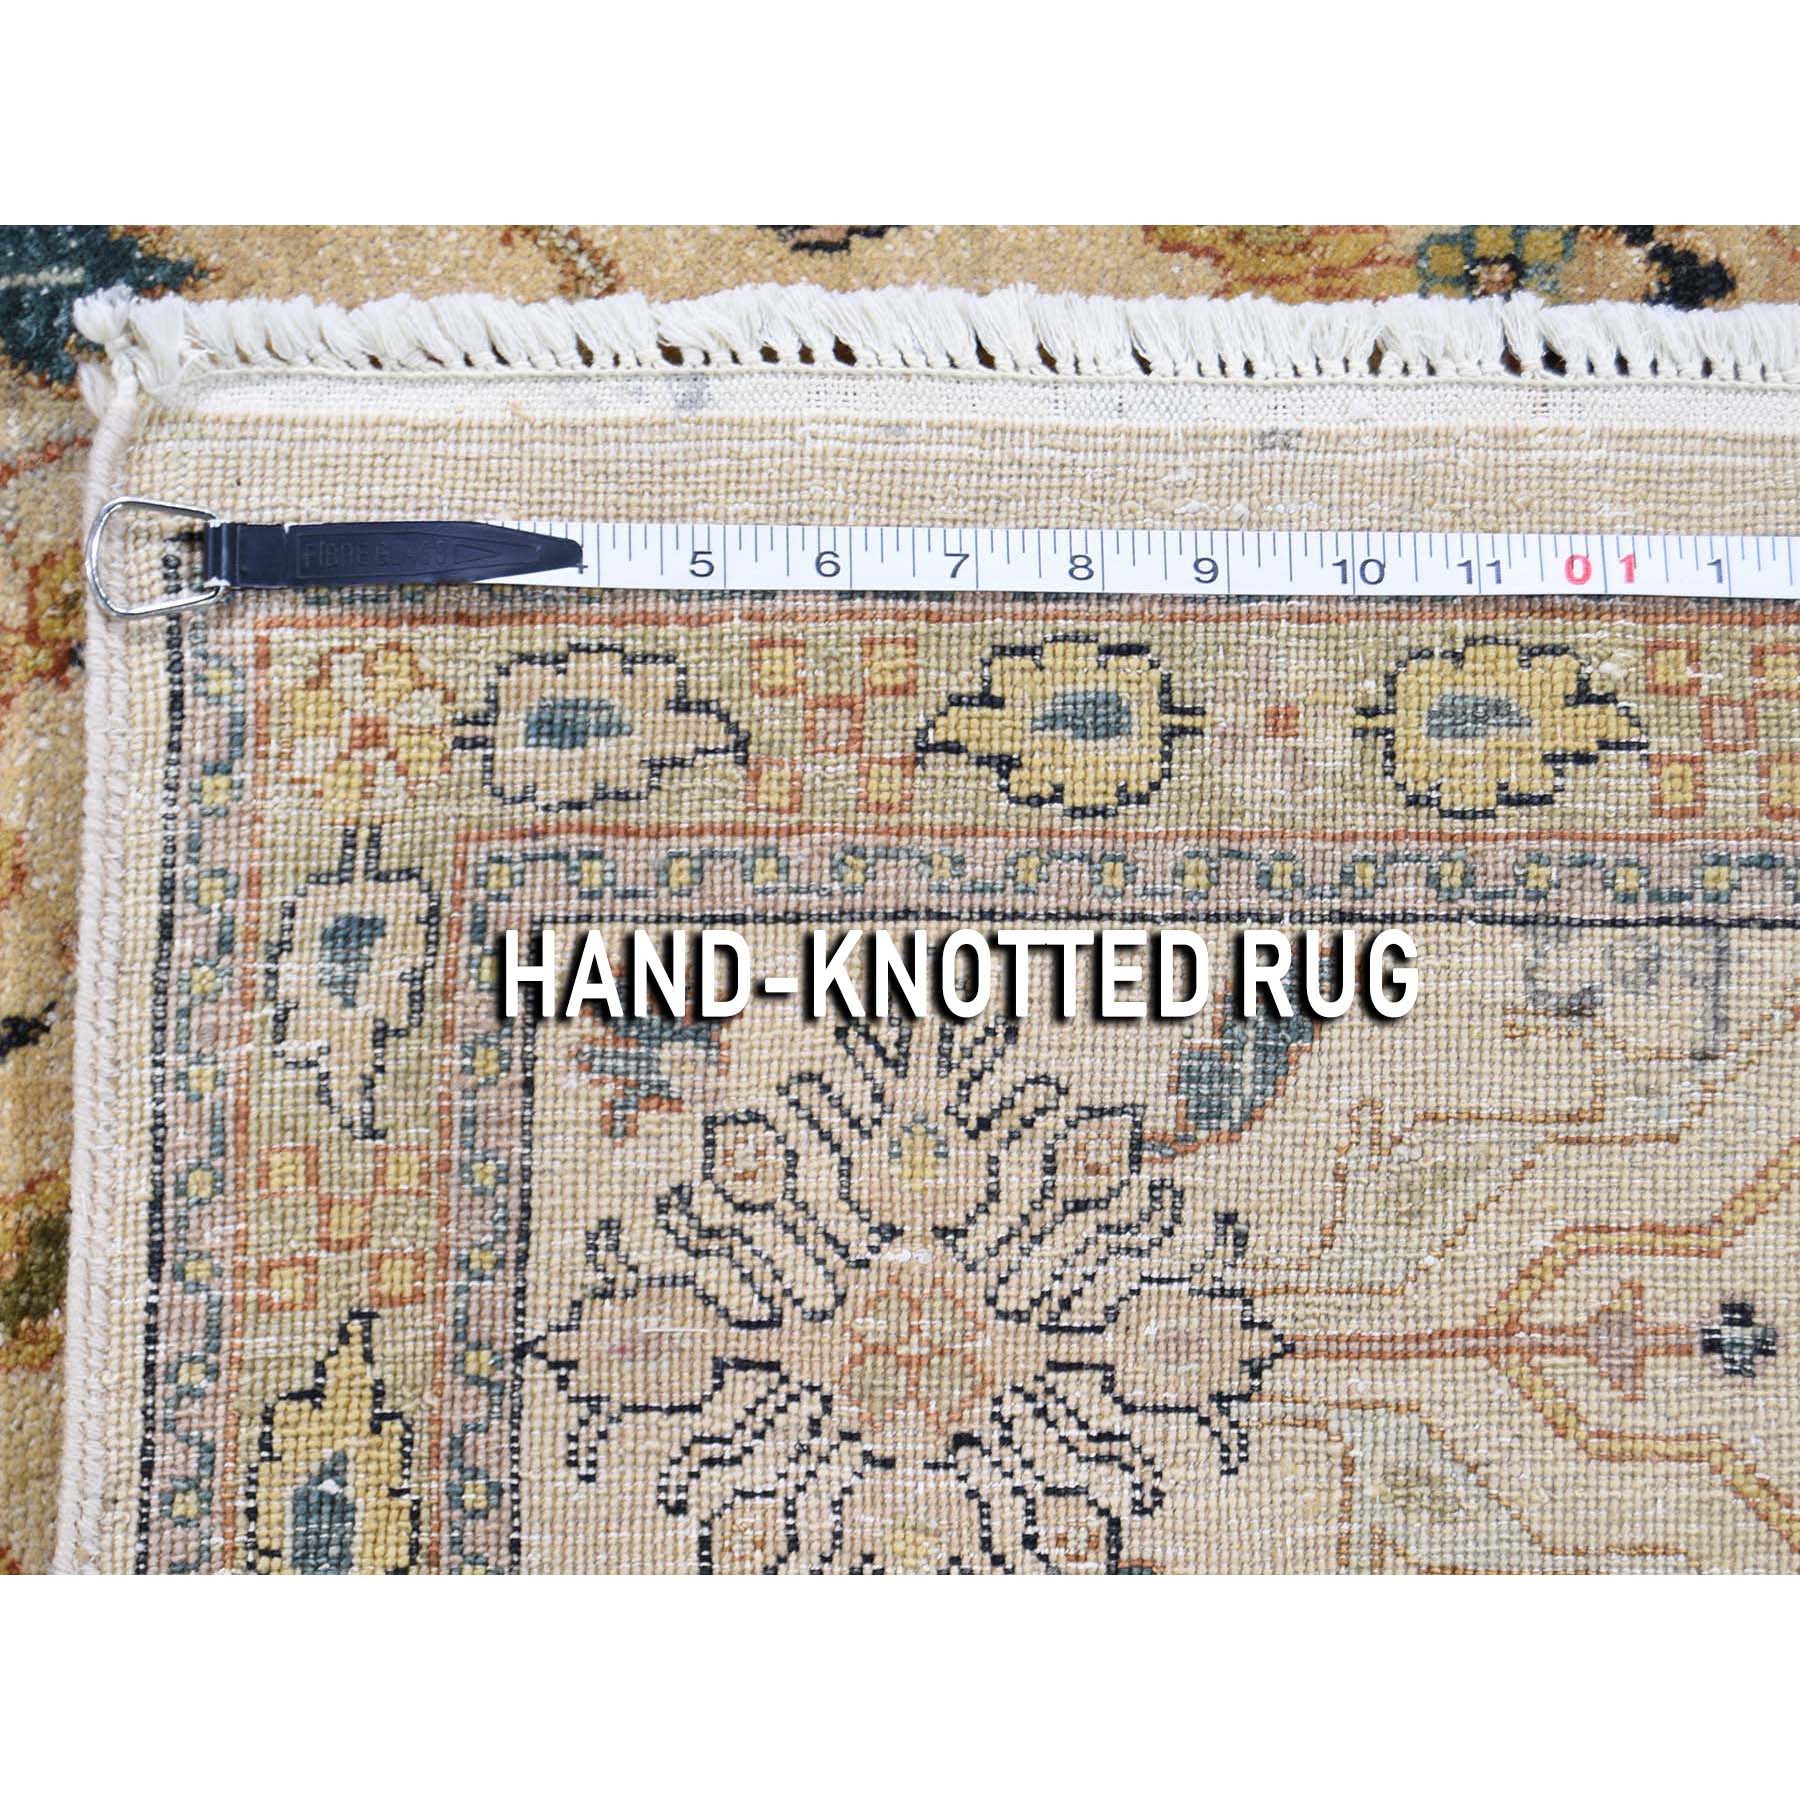 7-10 x10-1  On Clearance Worn Beige Sarouk Fereghan Hand Knotted Oriental Rug 